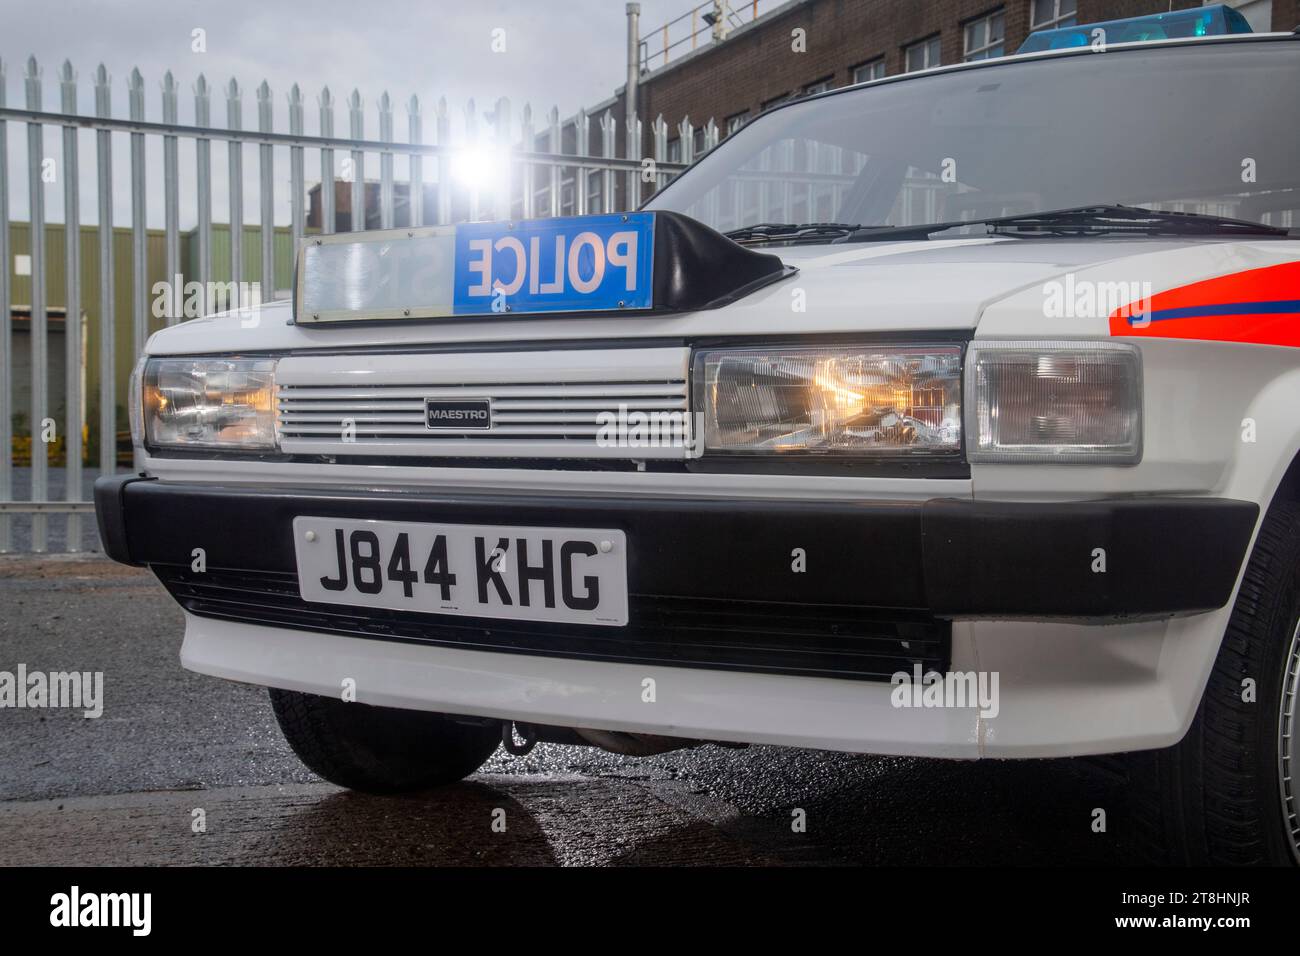 1992 Austin Maestro Police car from Lancashire Constabulary in the UK Stock Photo